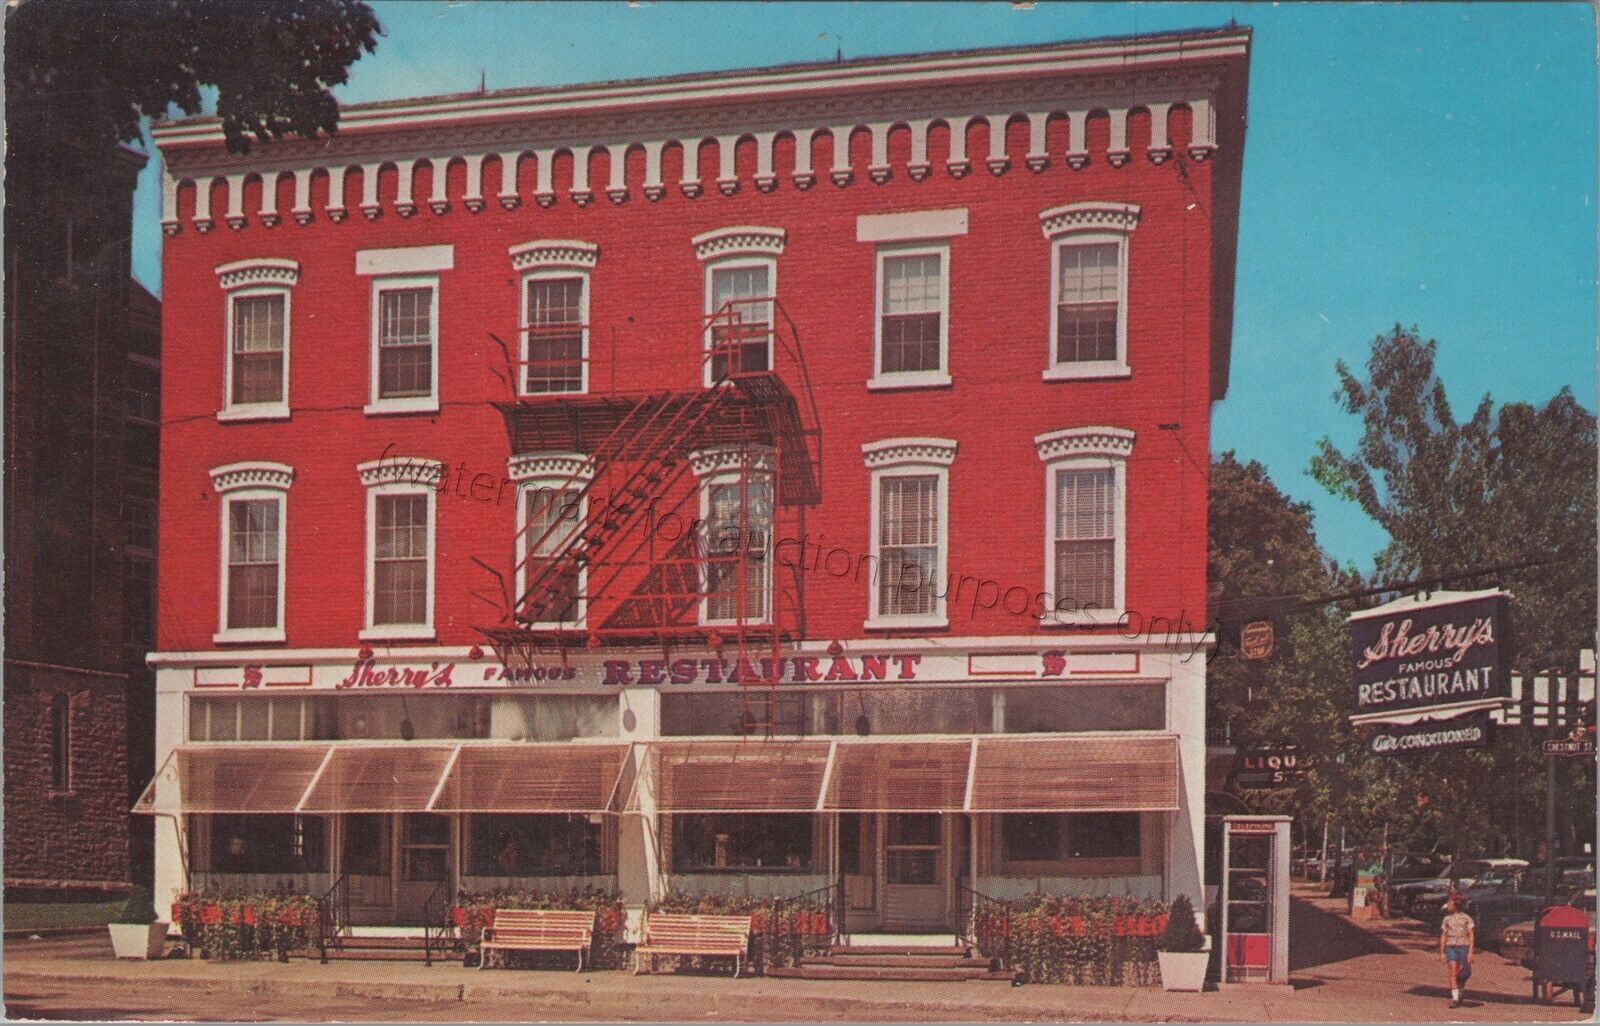 Cooperstown, NY: Sherry\'s Famous Restaurant - Vintage c 1950s New York Postcard